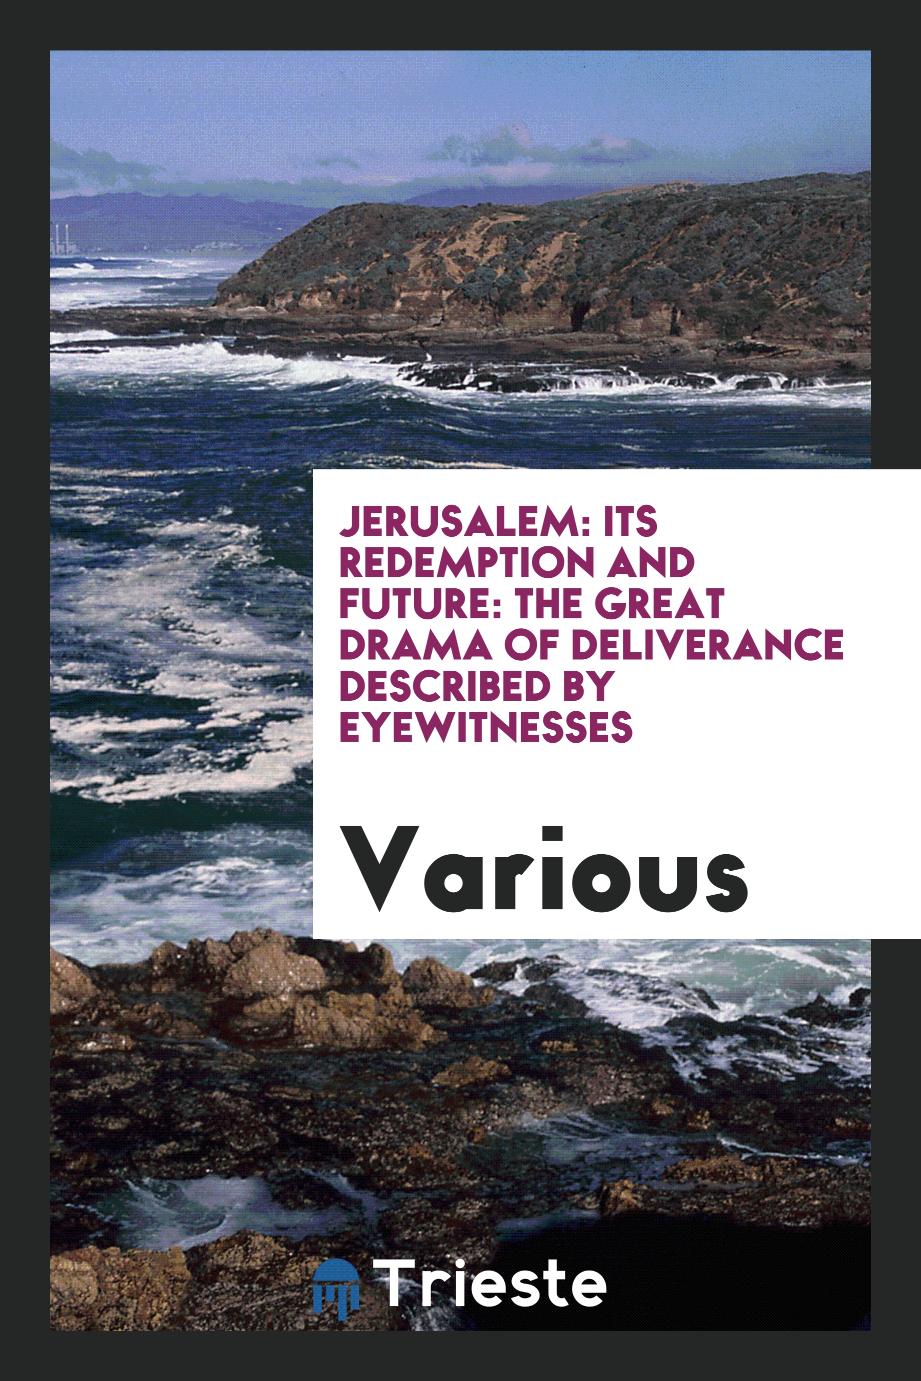 Jerusalem: its redemption and future: the great drama of deliverance described by eyewitnesses